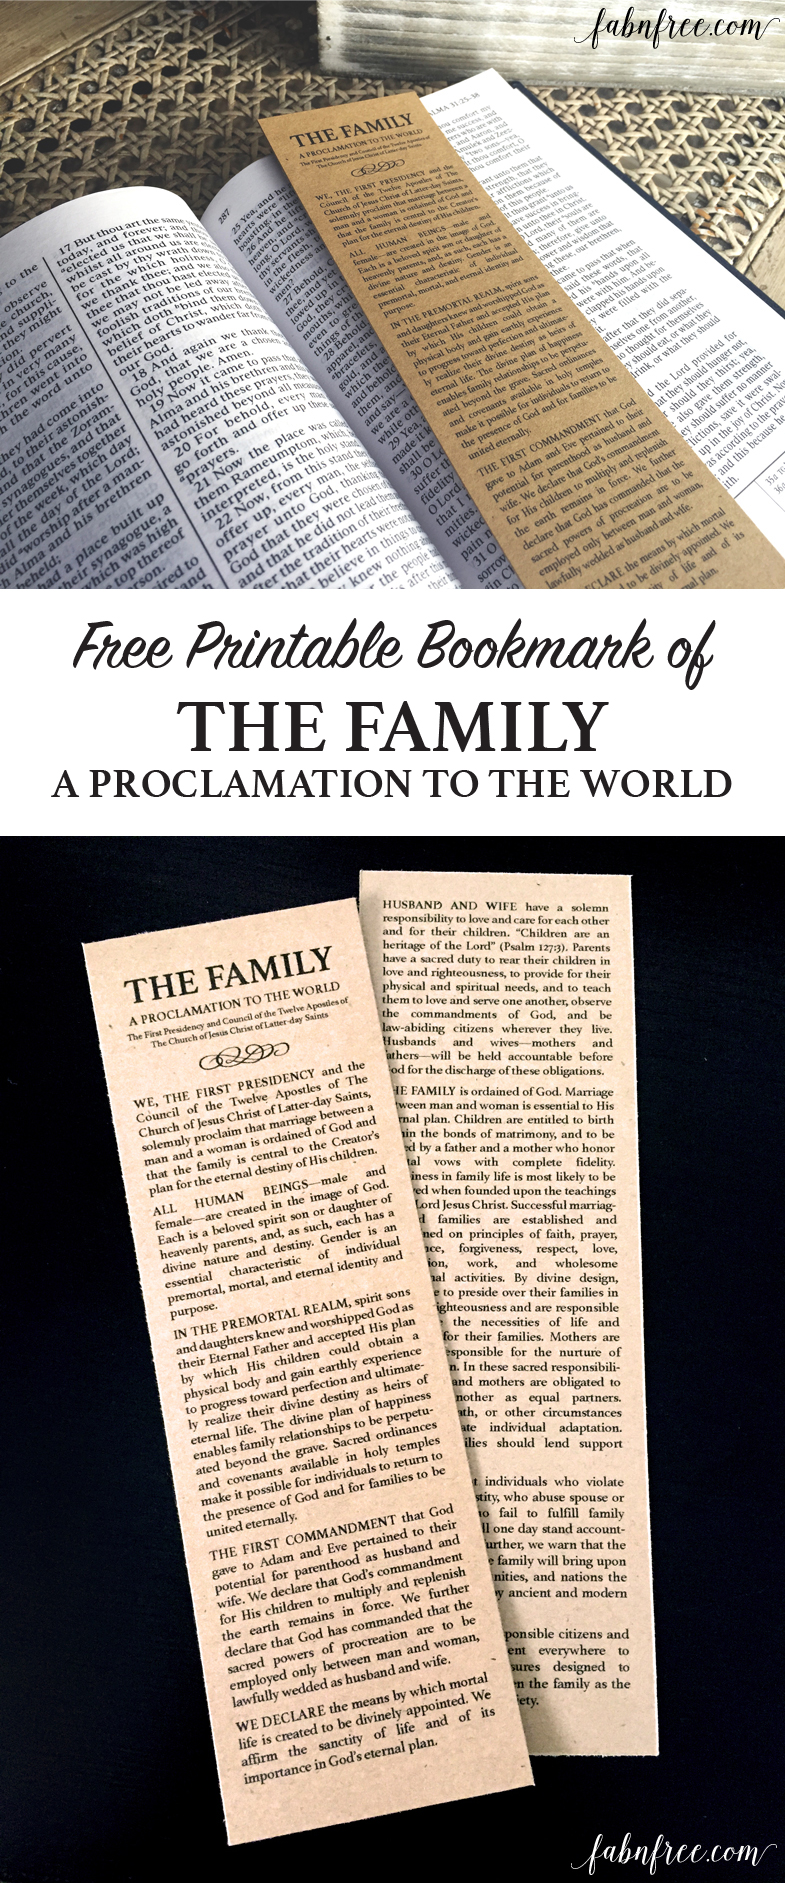 Free Printable Bookmark - The Family: A Proclamation to the World  //  fabnfree.com